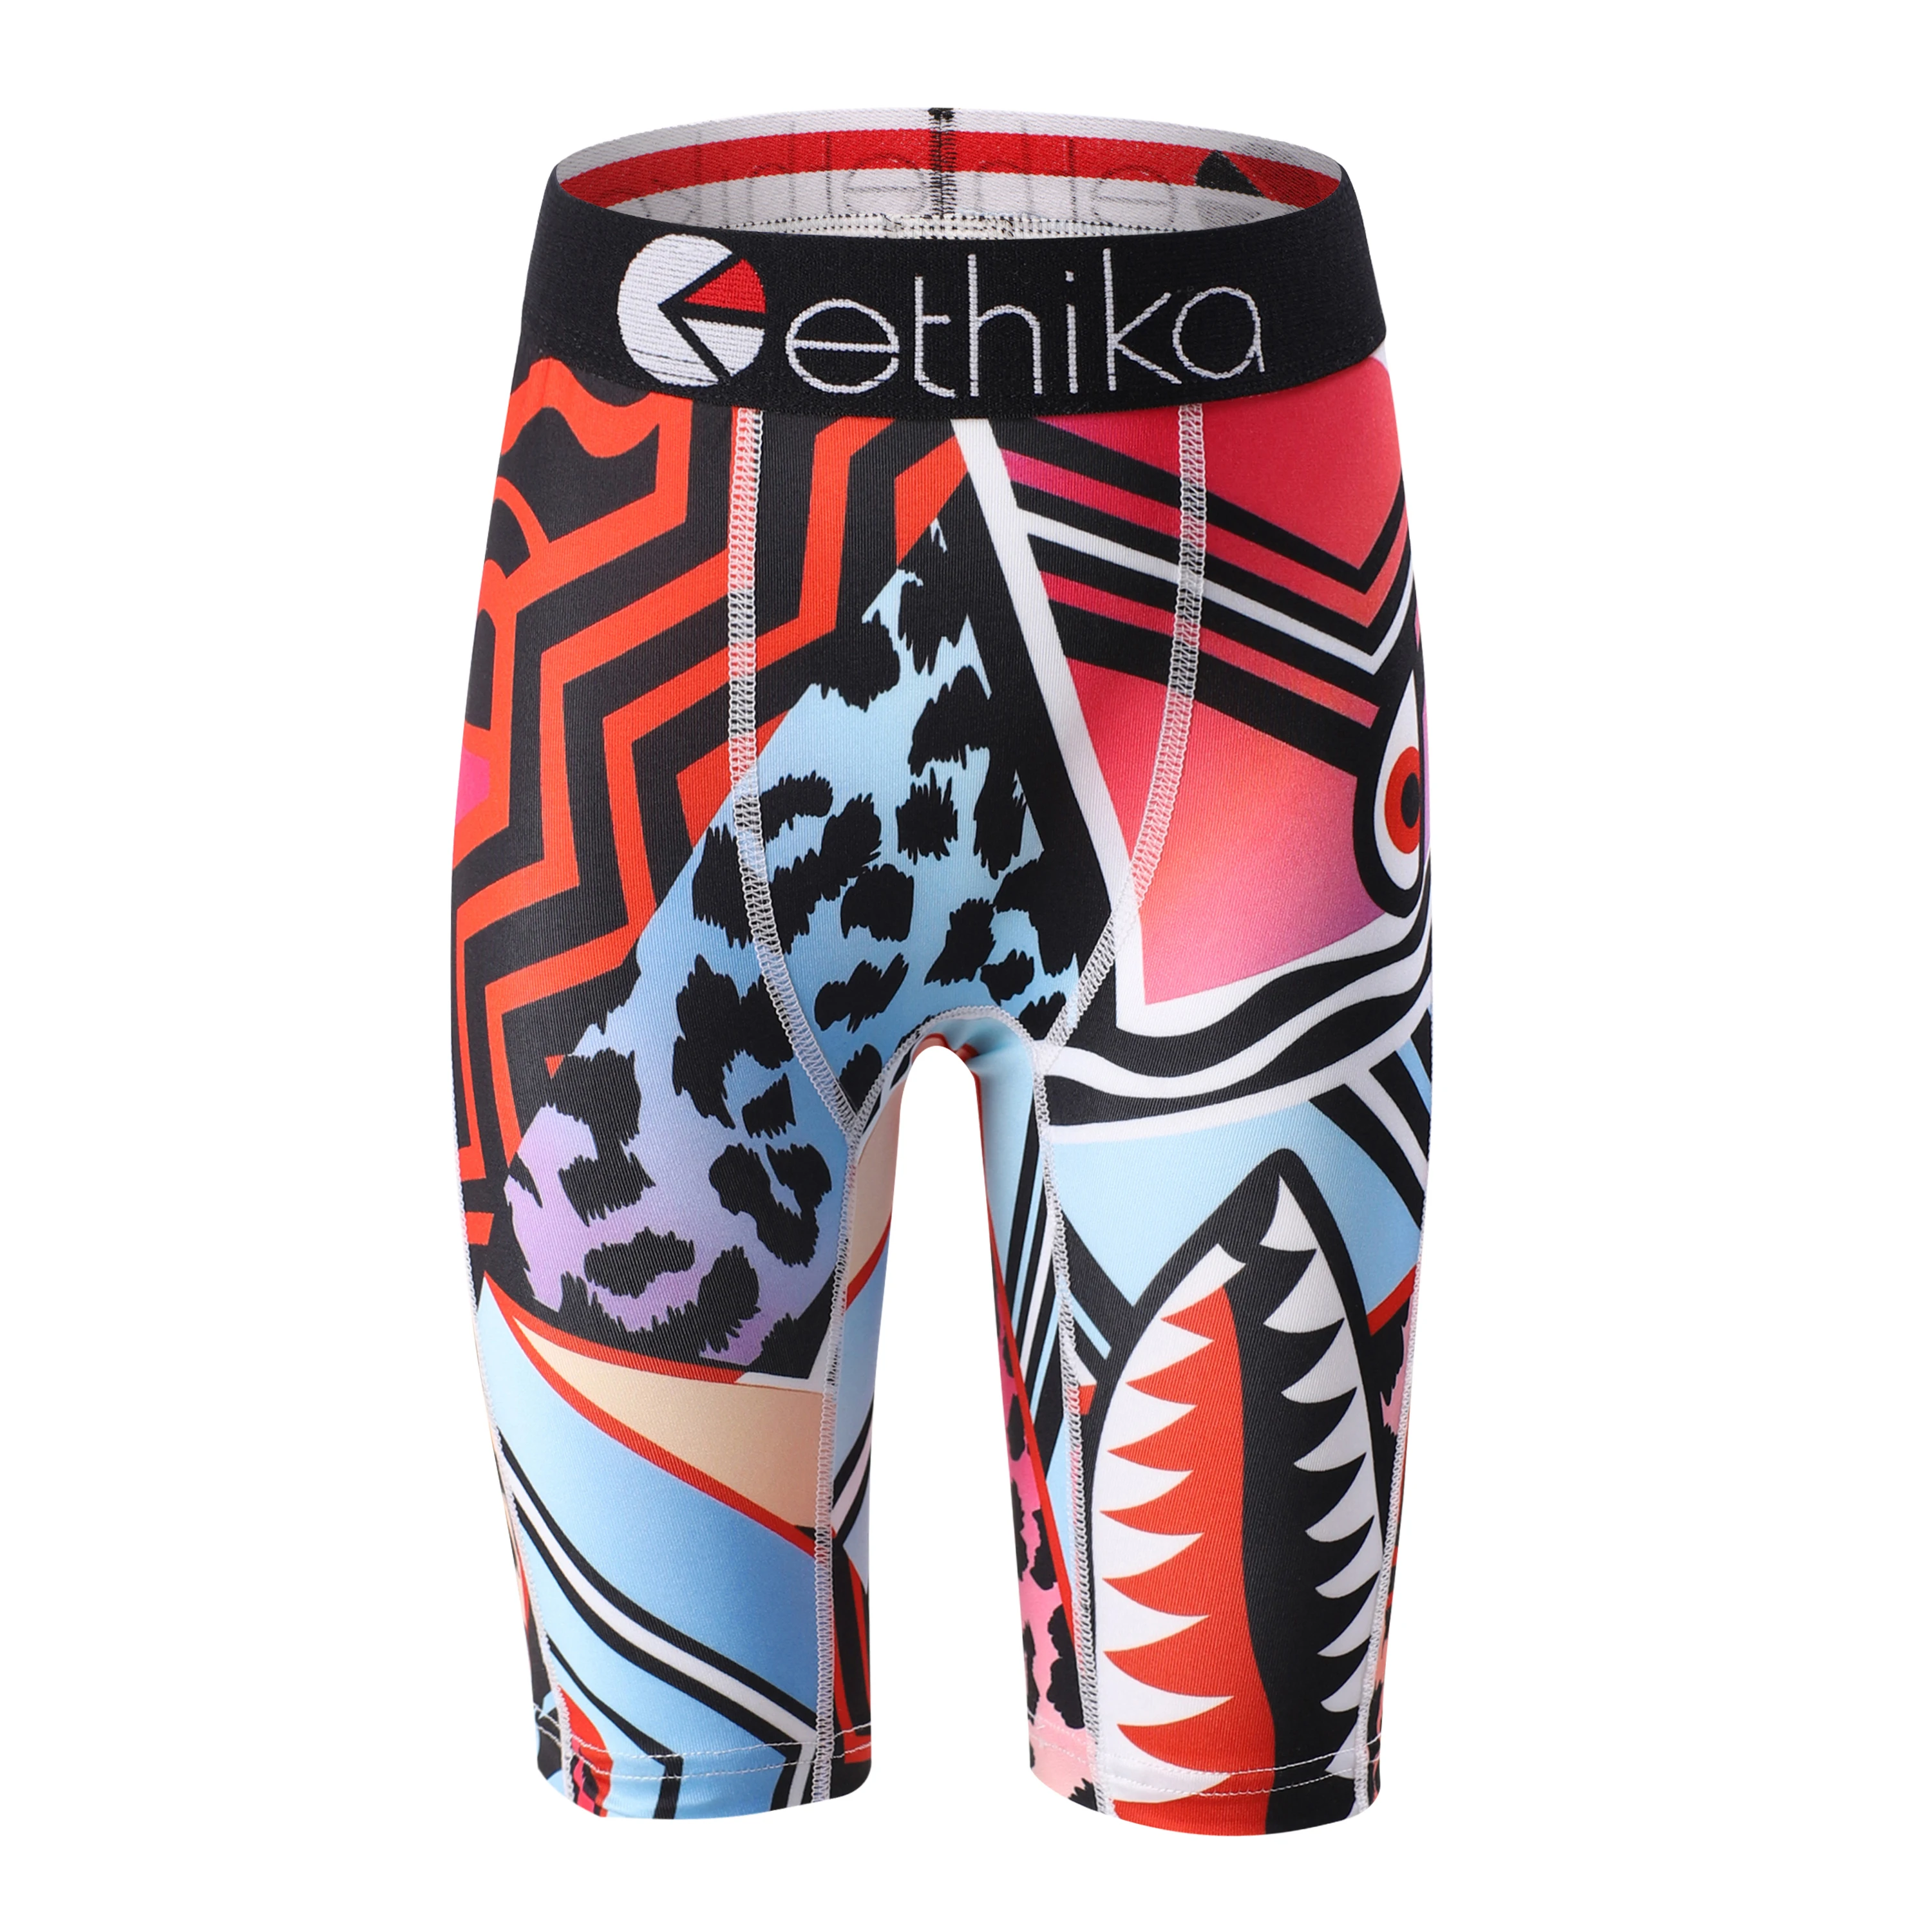 

Ethika Kids Underware Ethika Underwear Kid Boxer Shorts High Quality Boy Underpants Polyester Boxers Panties Hombre Calcon Homme